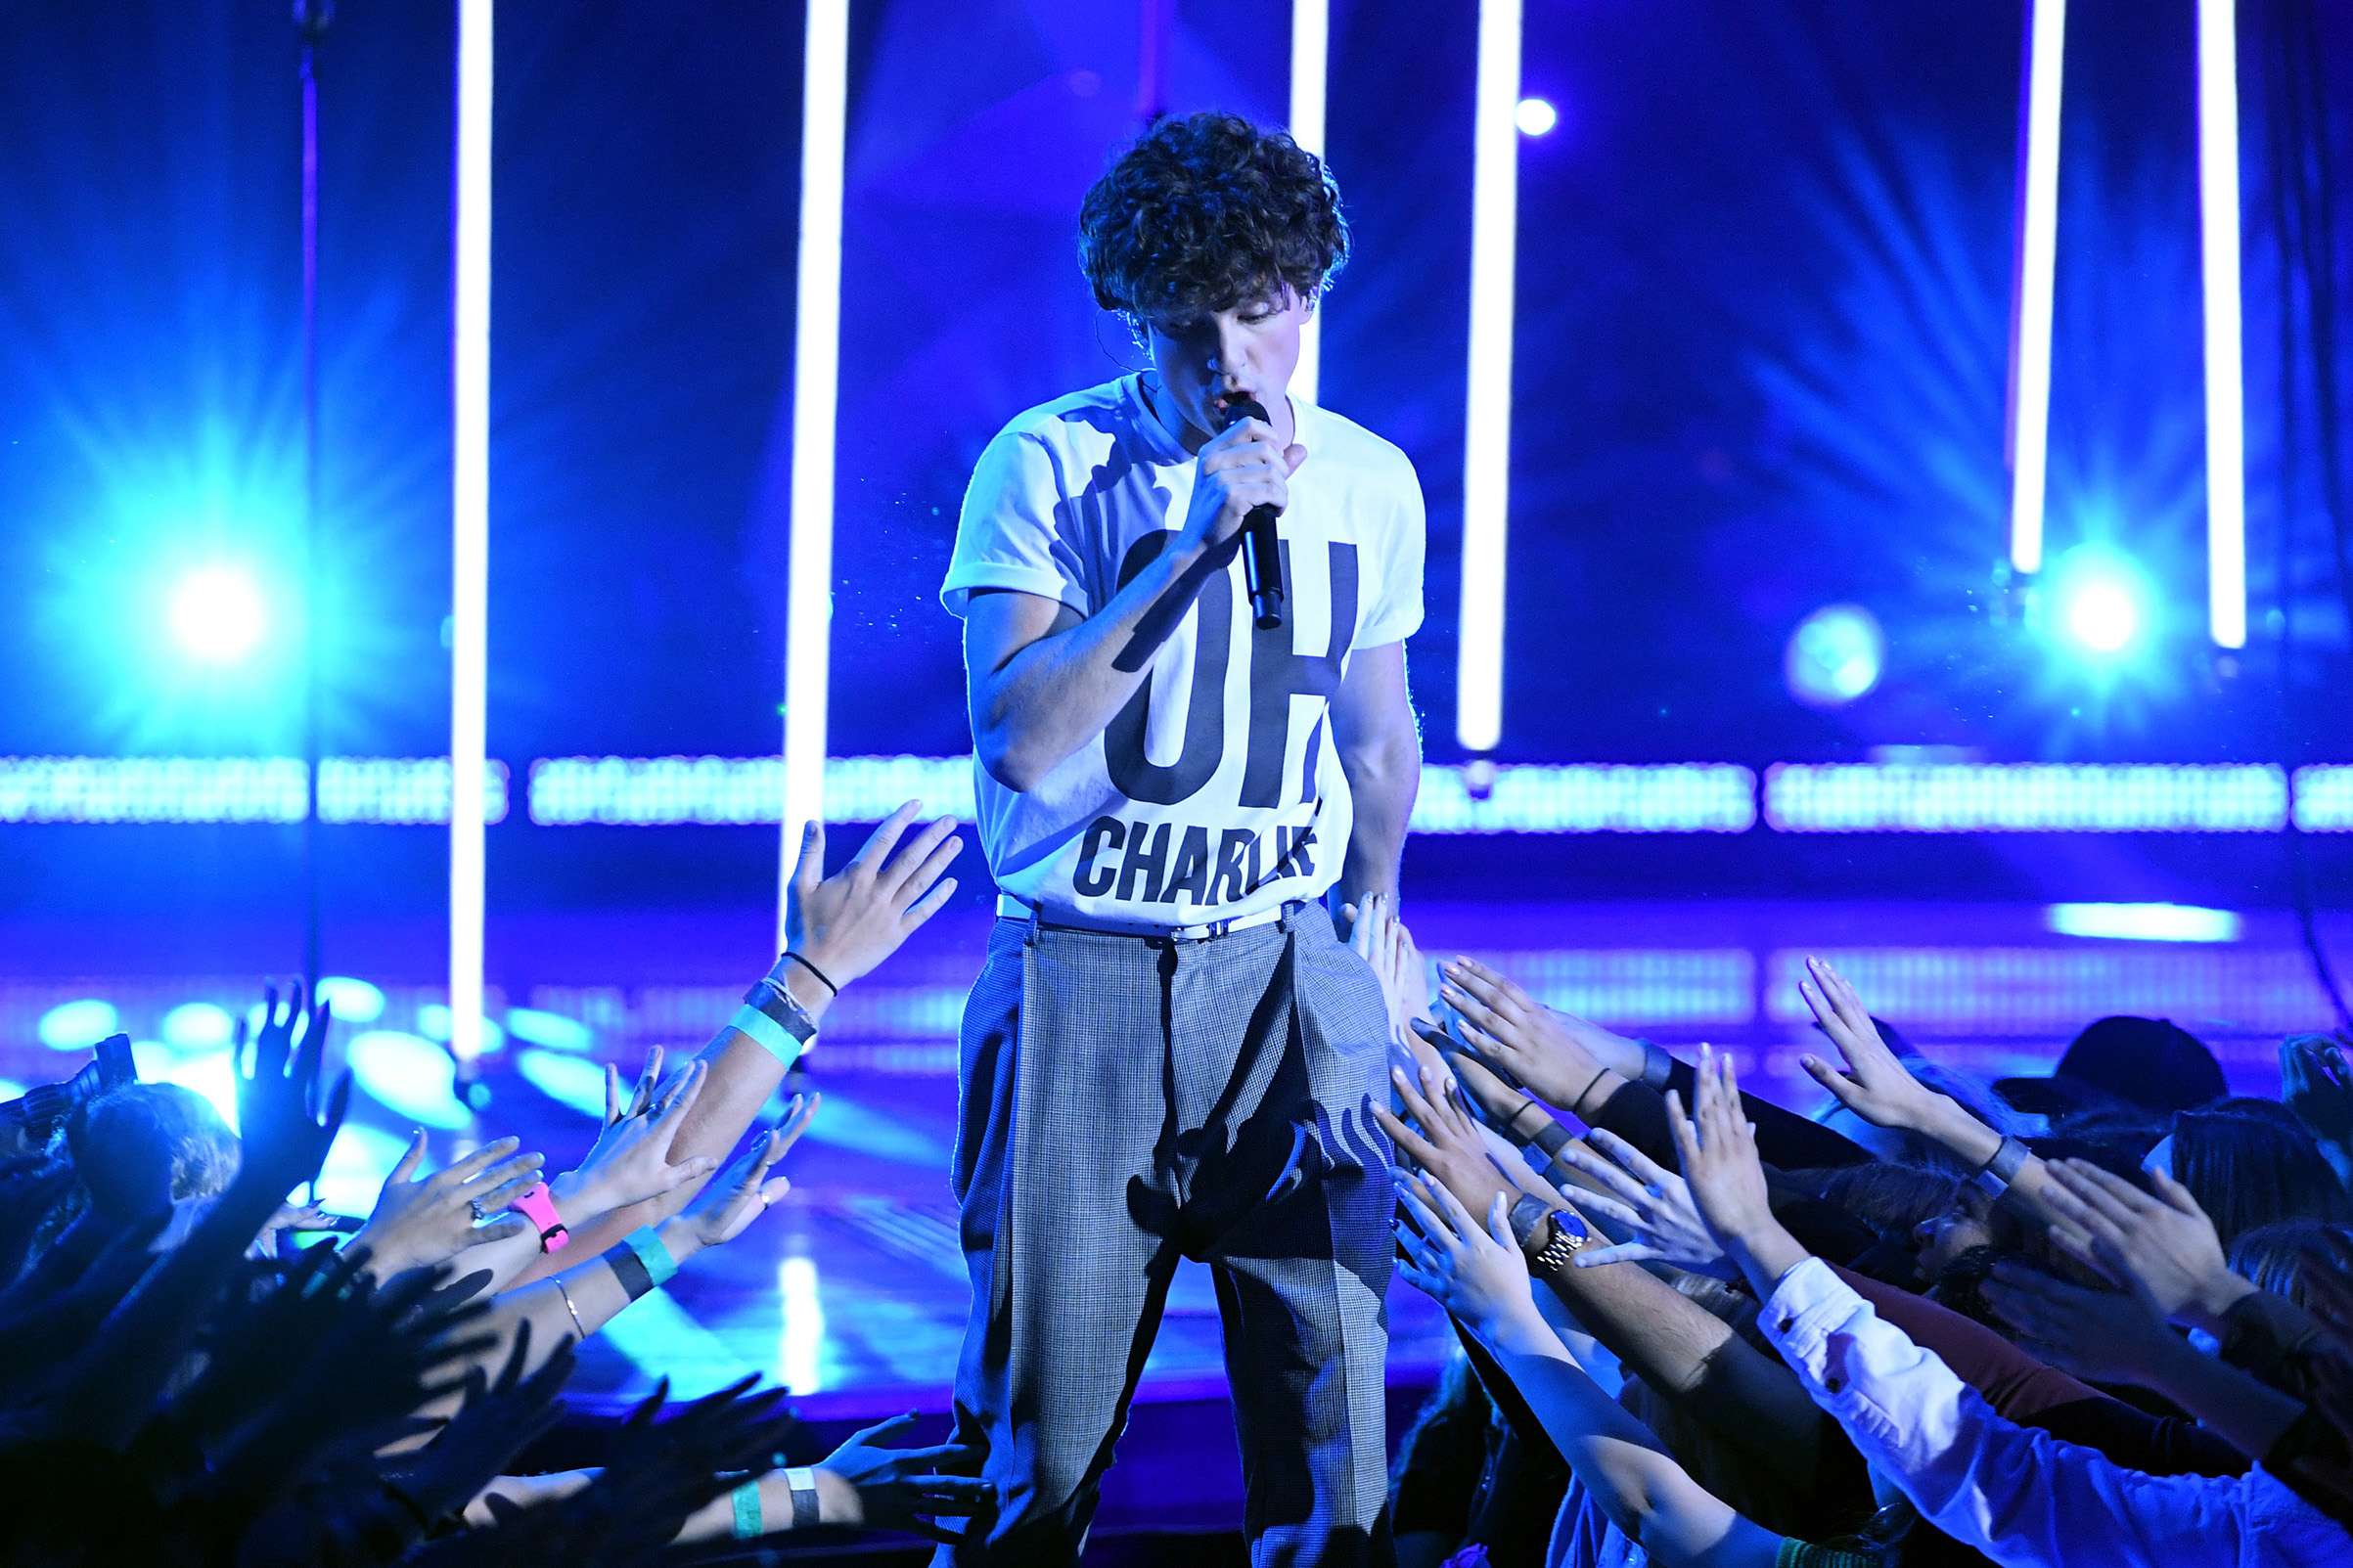 On his second album, Puth zeroes in on a sharper point of view (Getty Images)